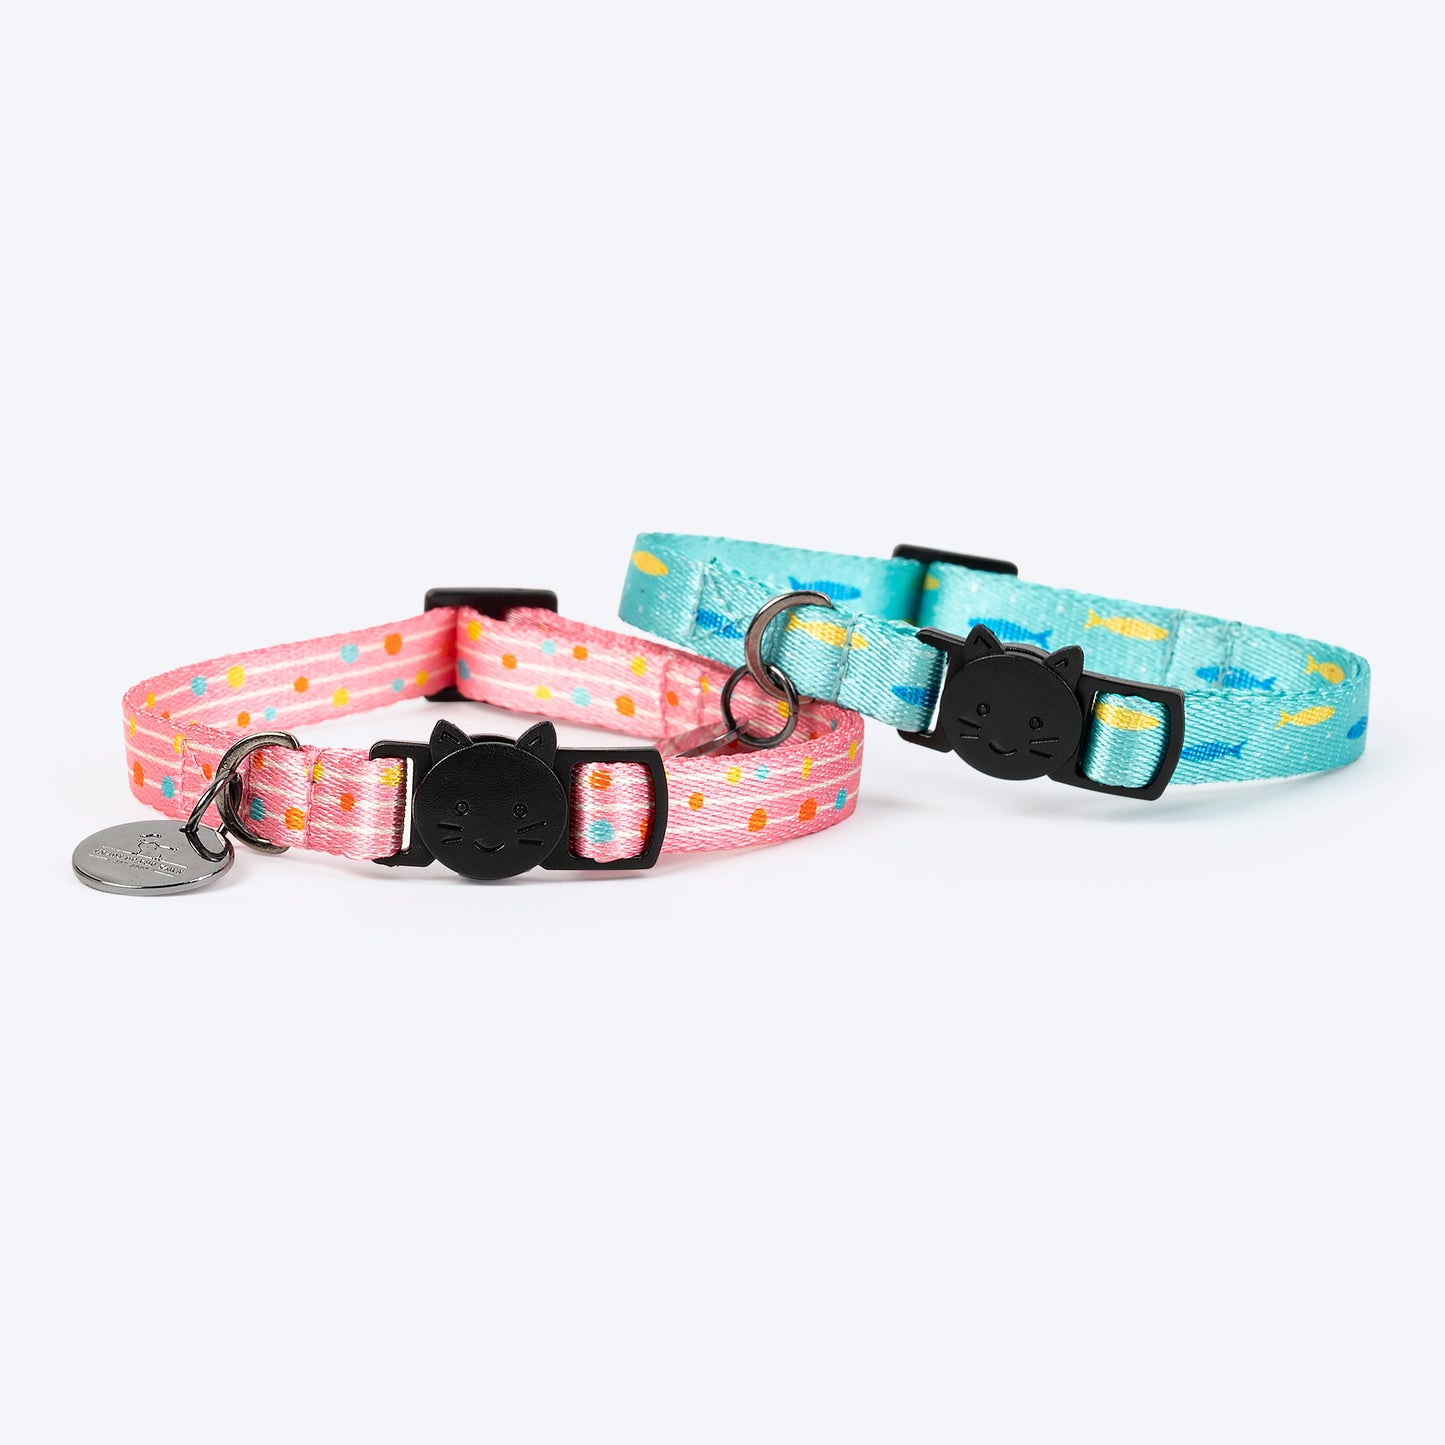 HUFT Meowvelous Cat Collars - Pink & Sea Blue - Heads Up For Tails